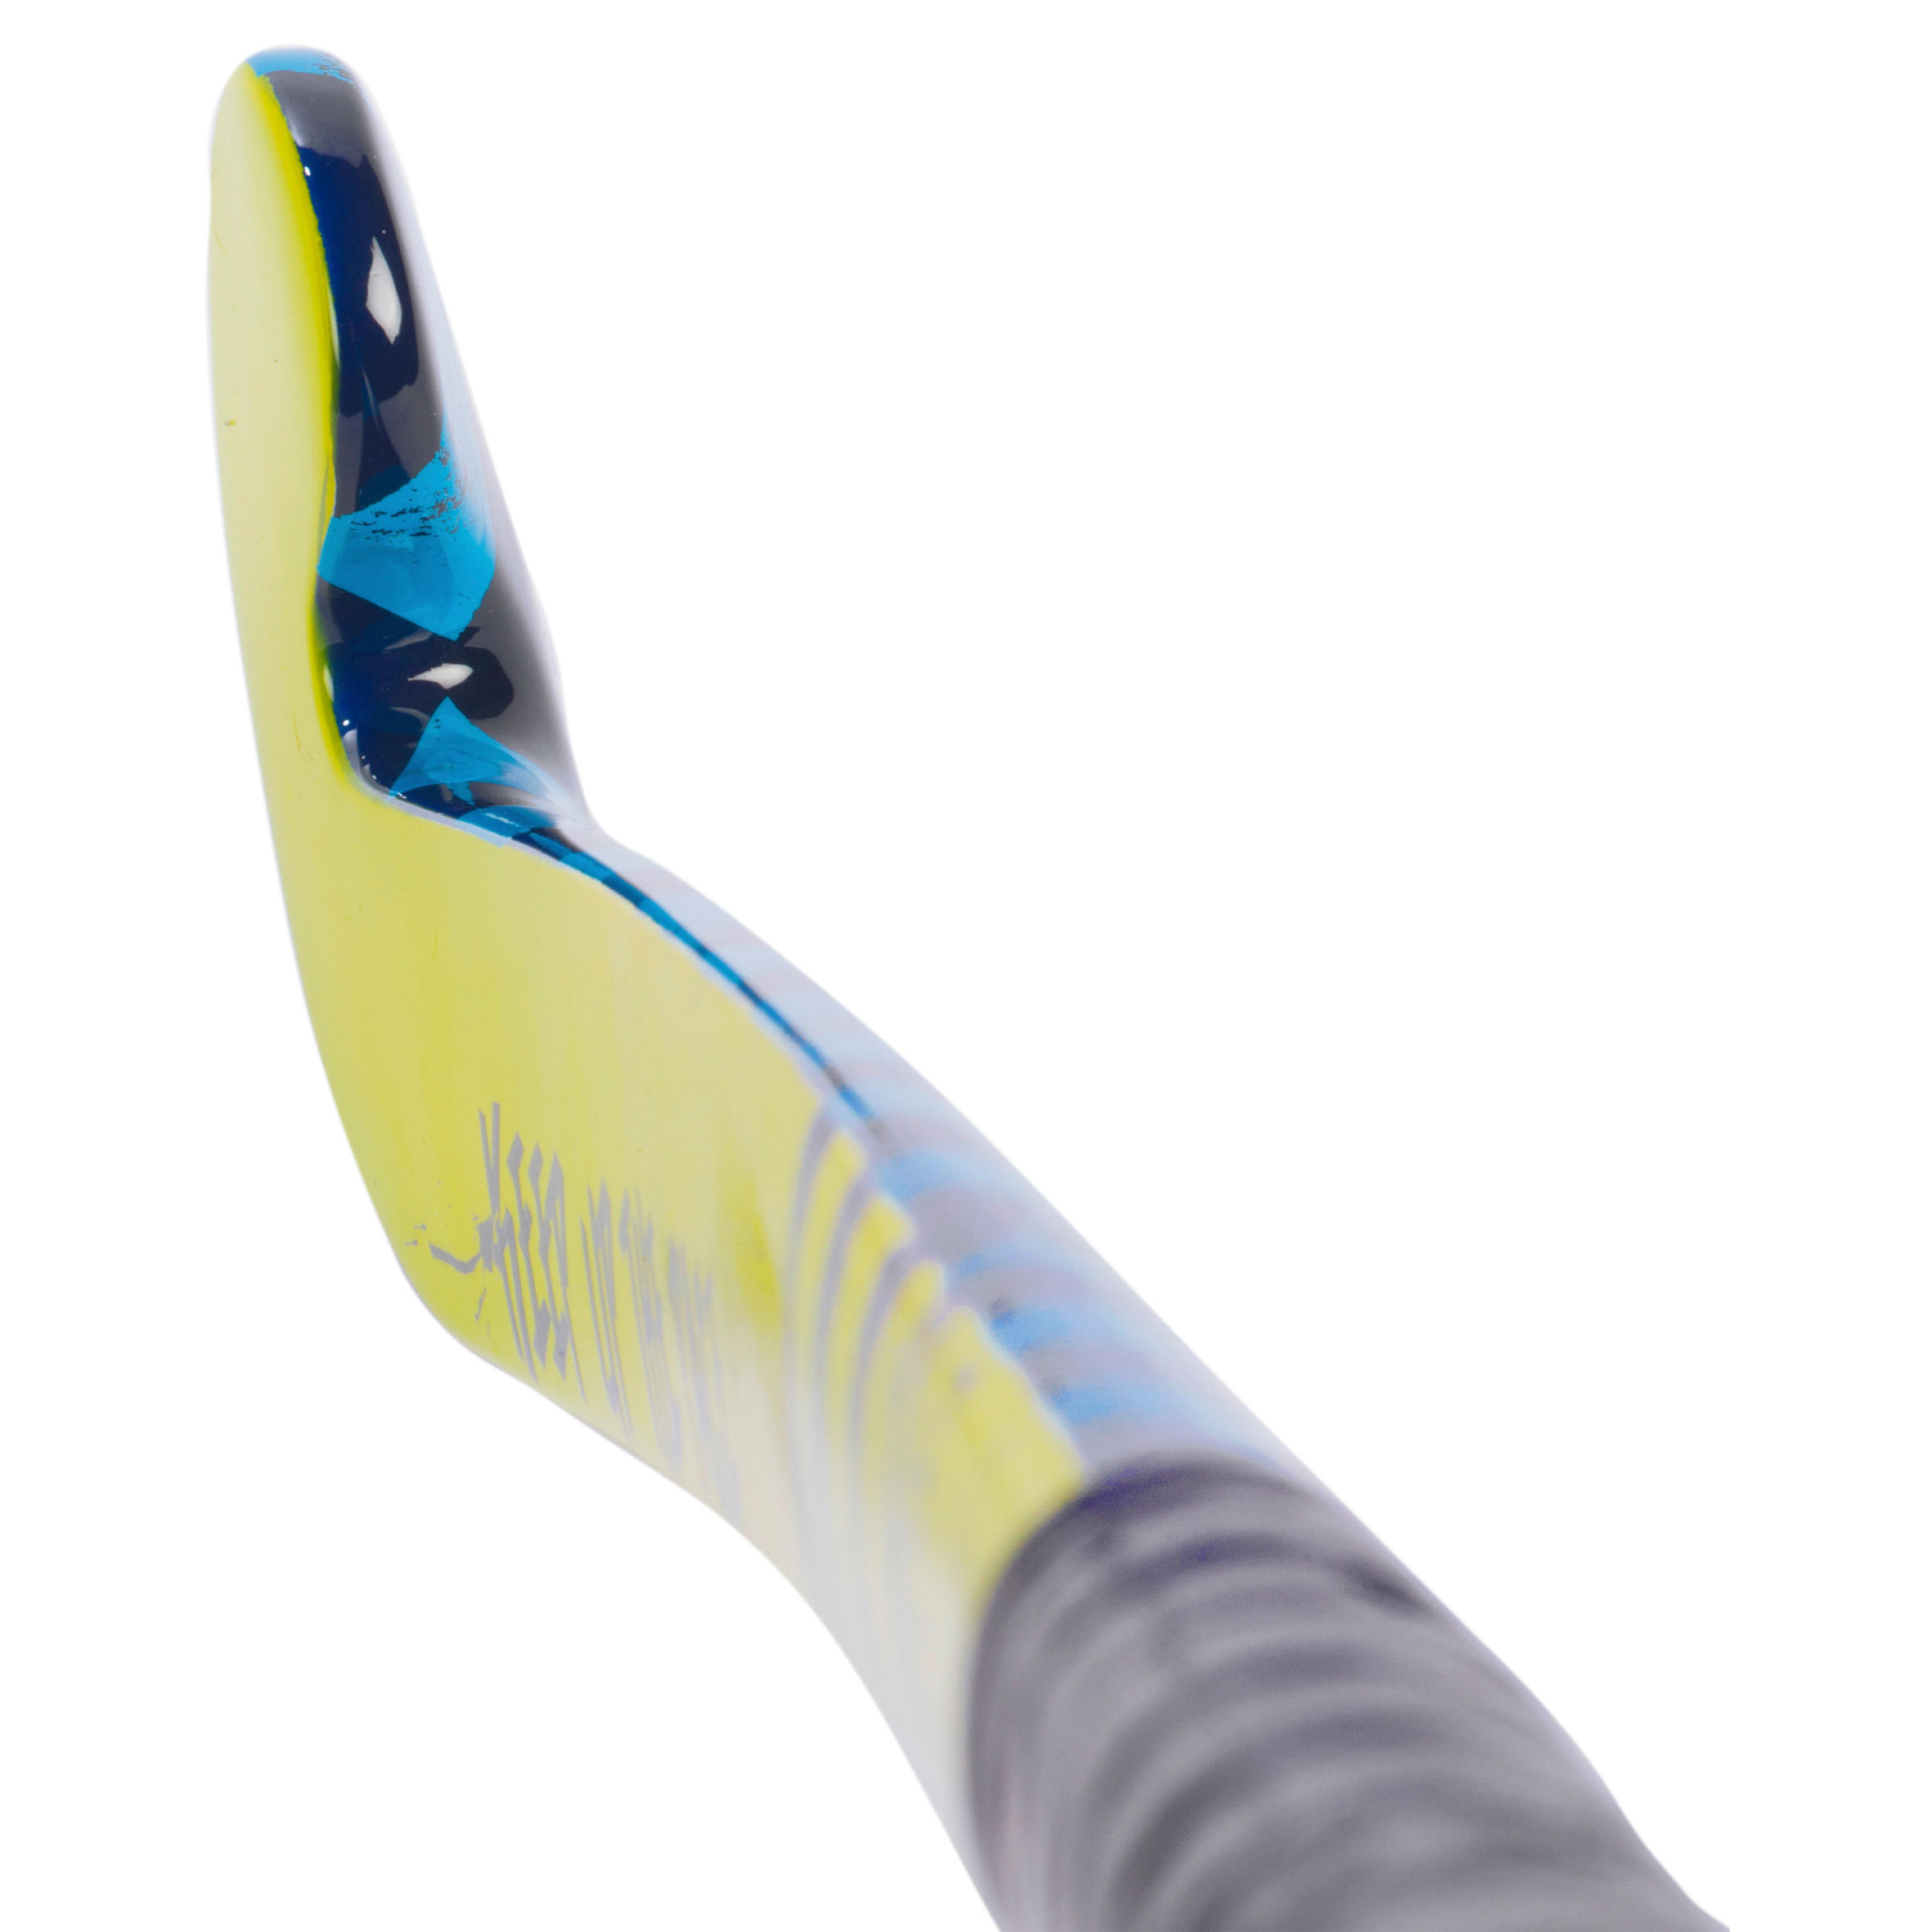 FH100 Kids' Beginner/Occasional Adult Field Hockey Wooden/FB Stick - Yellow/Blue 5/8